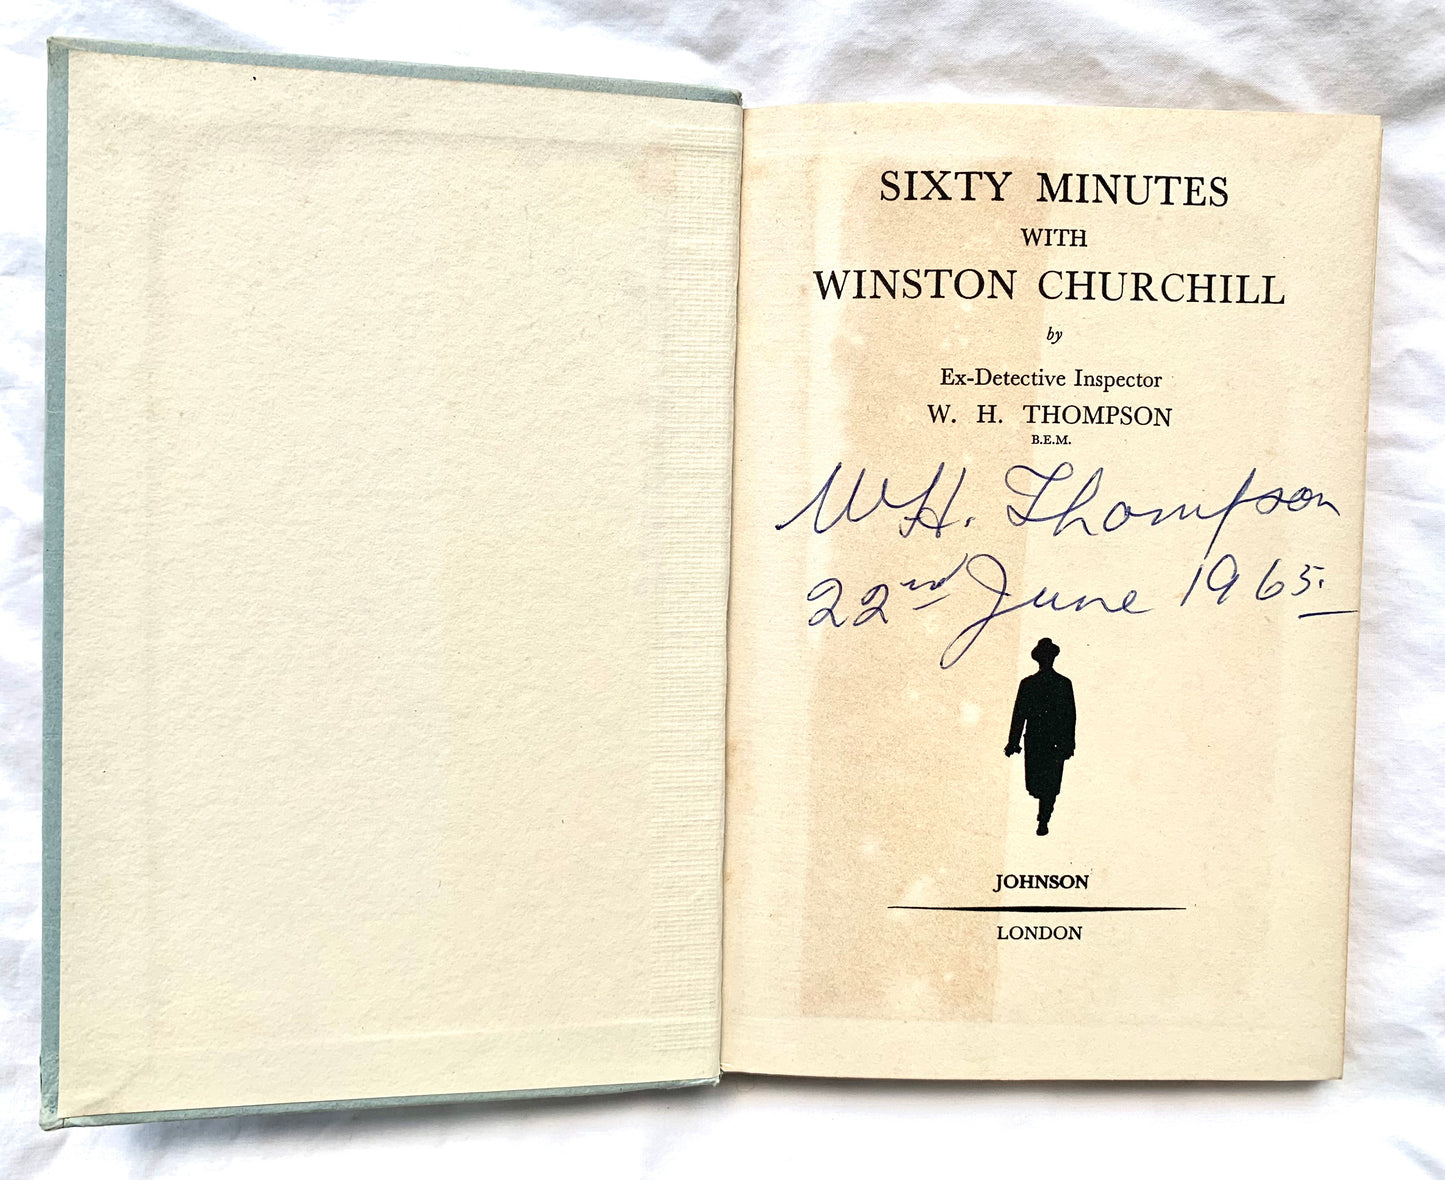 Sixty Minutes with Winston Churchill original autograph.